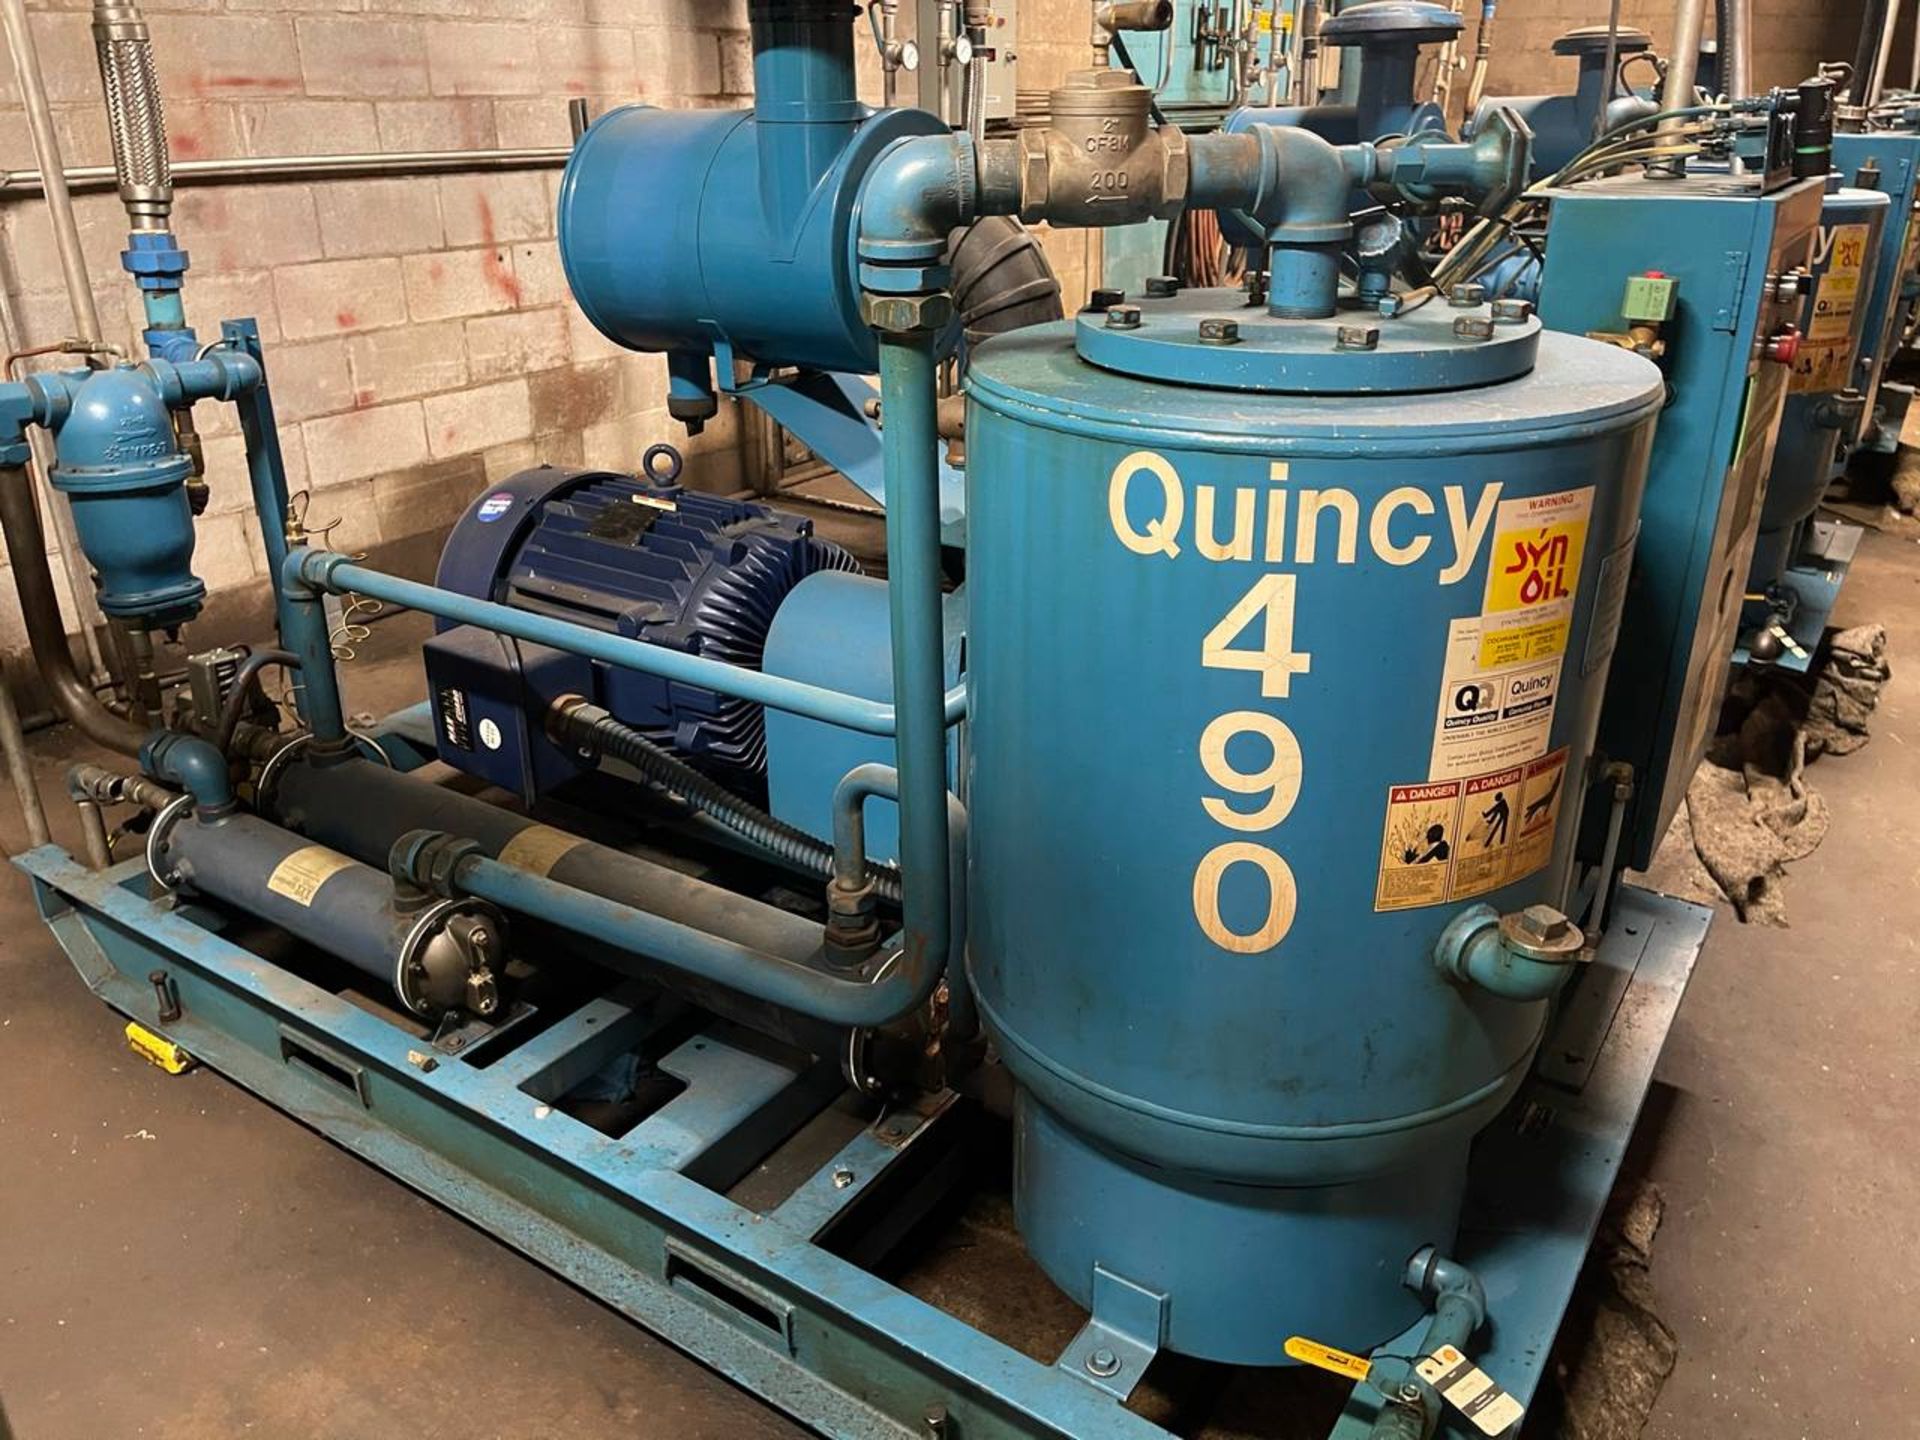 QUINCY 490 100 HP ROTARY SCREW AIR COMPRESSOR - Image 2 of 4